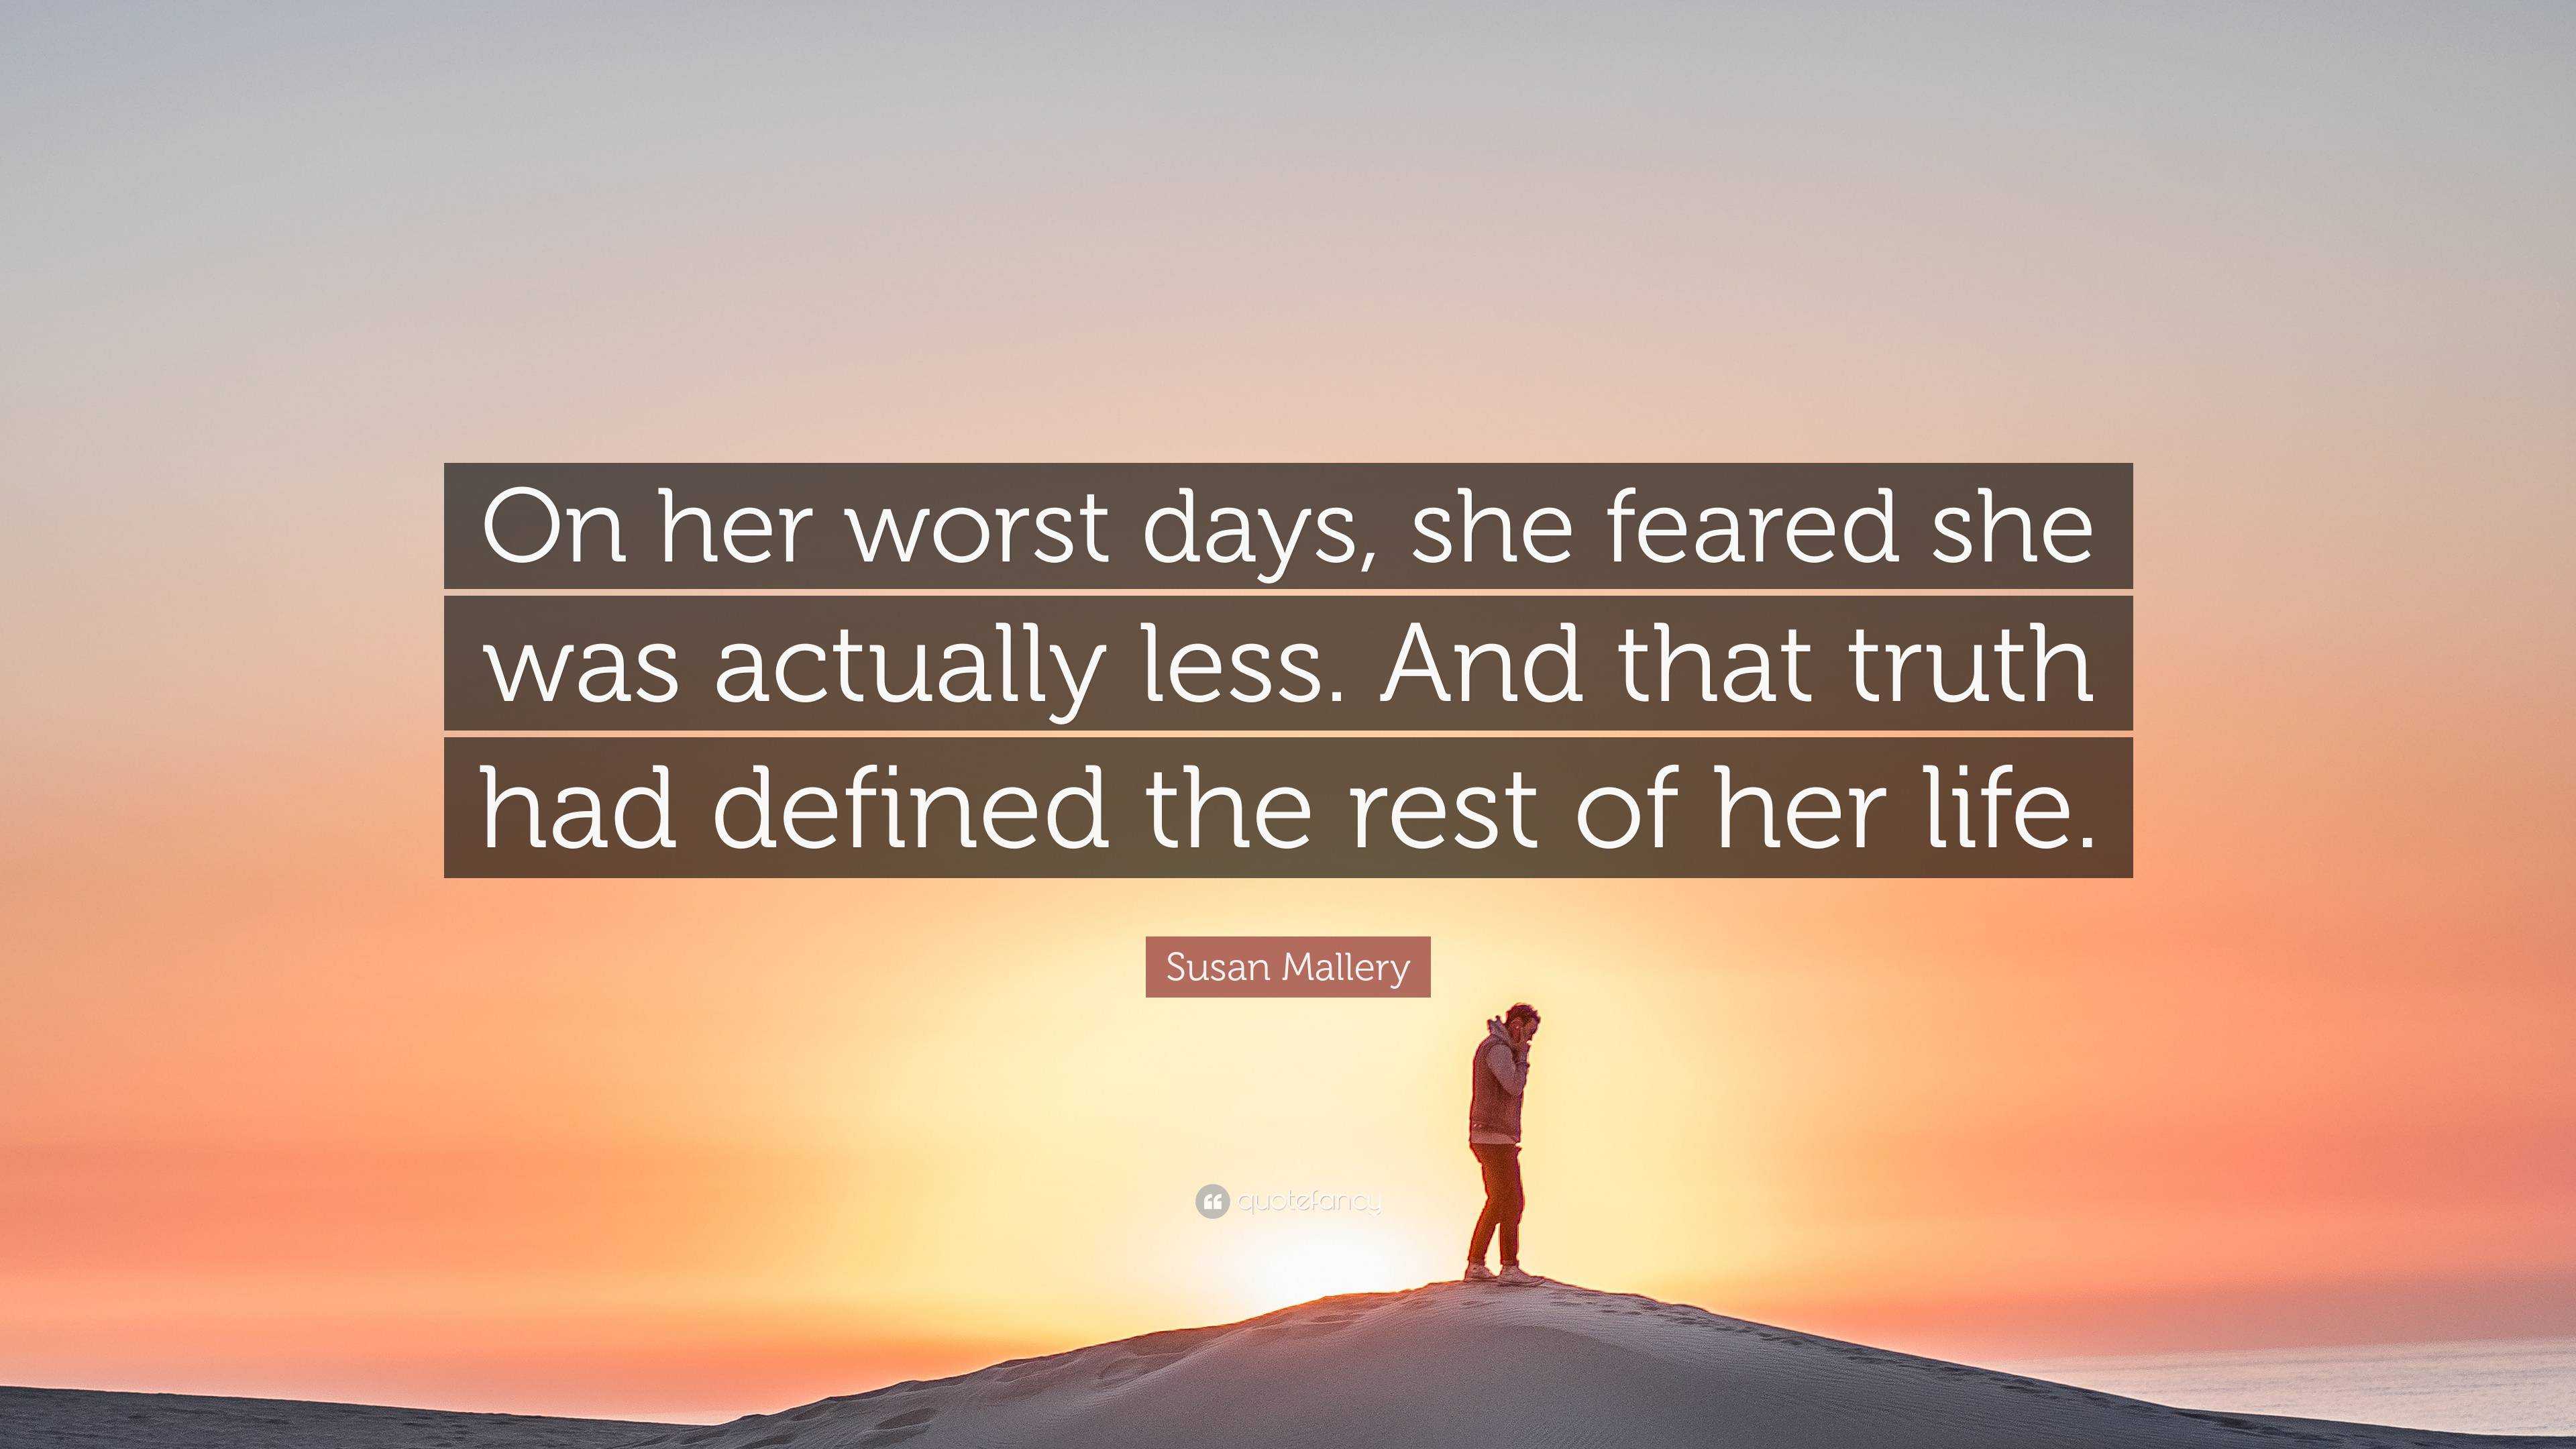 Susan Mallery Quote: “On her worst days, she feared she was actually ...